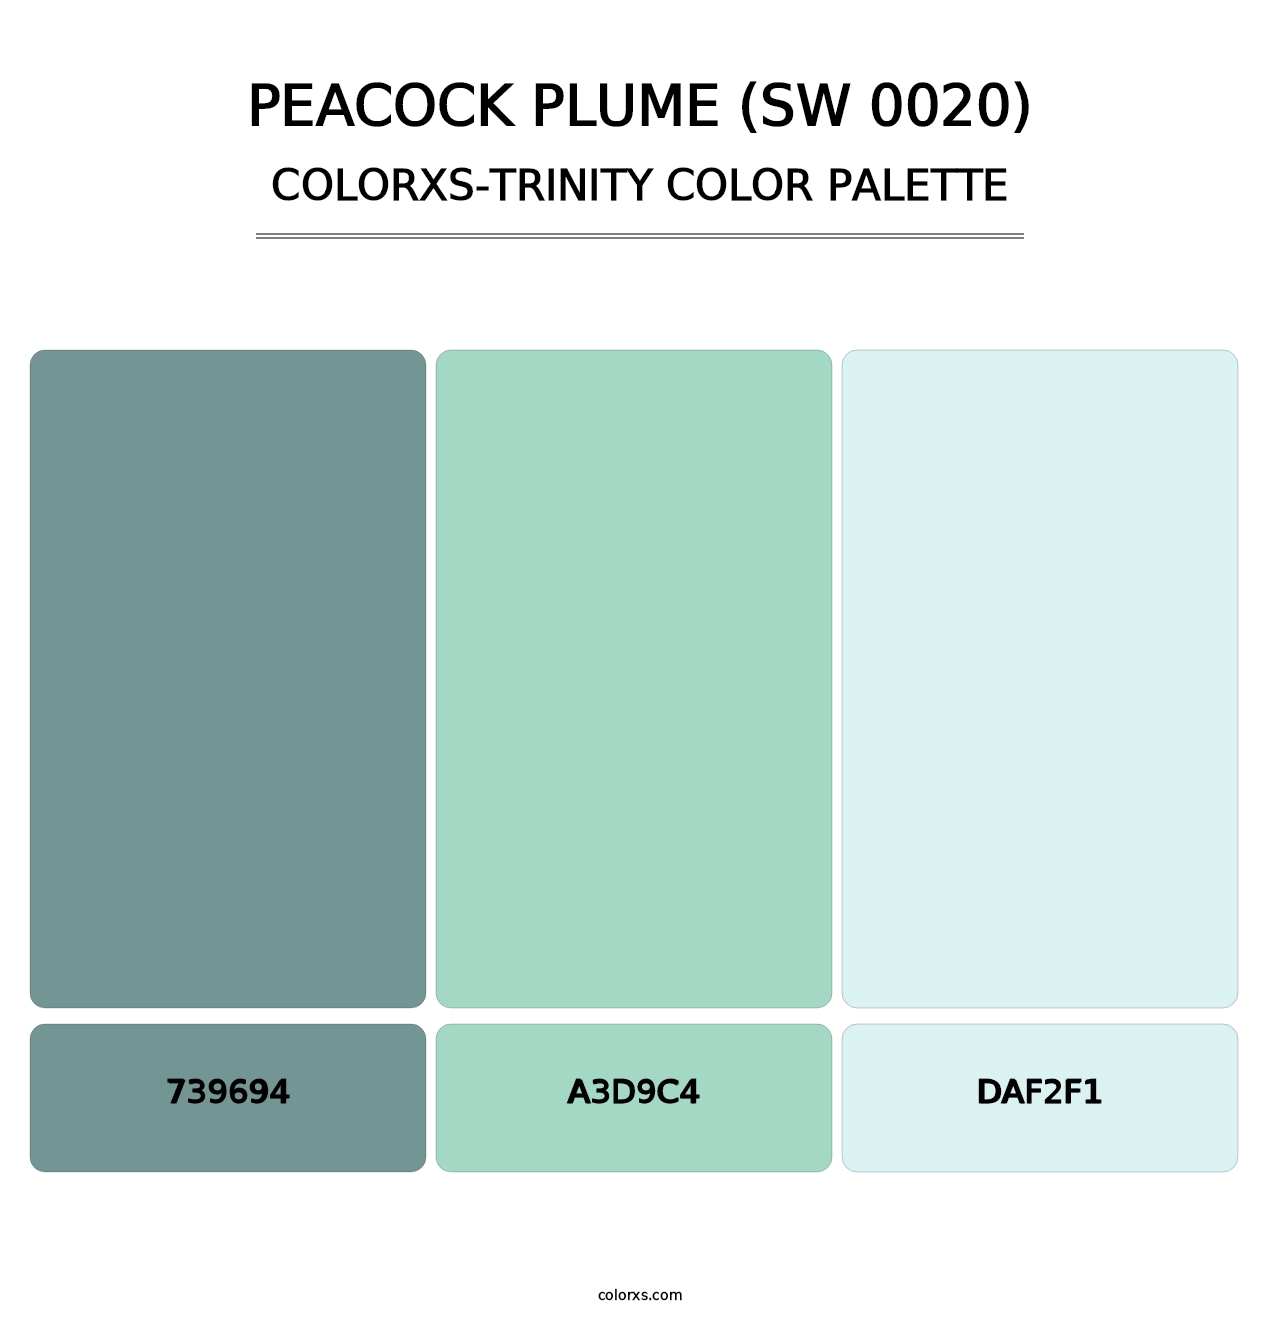 Peacock Plume (SW 0020) - Colorxs Trinity Palette